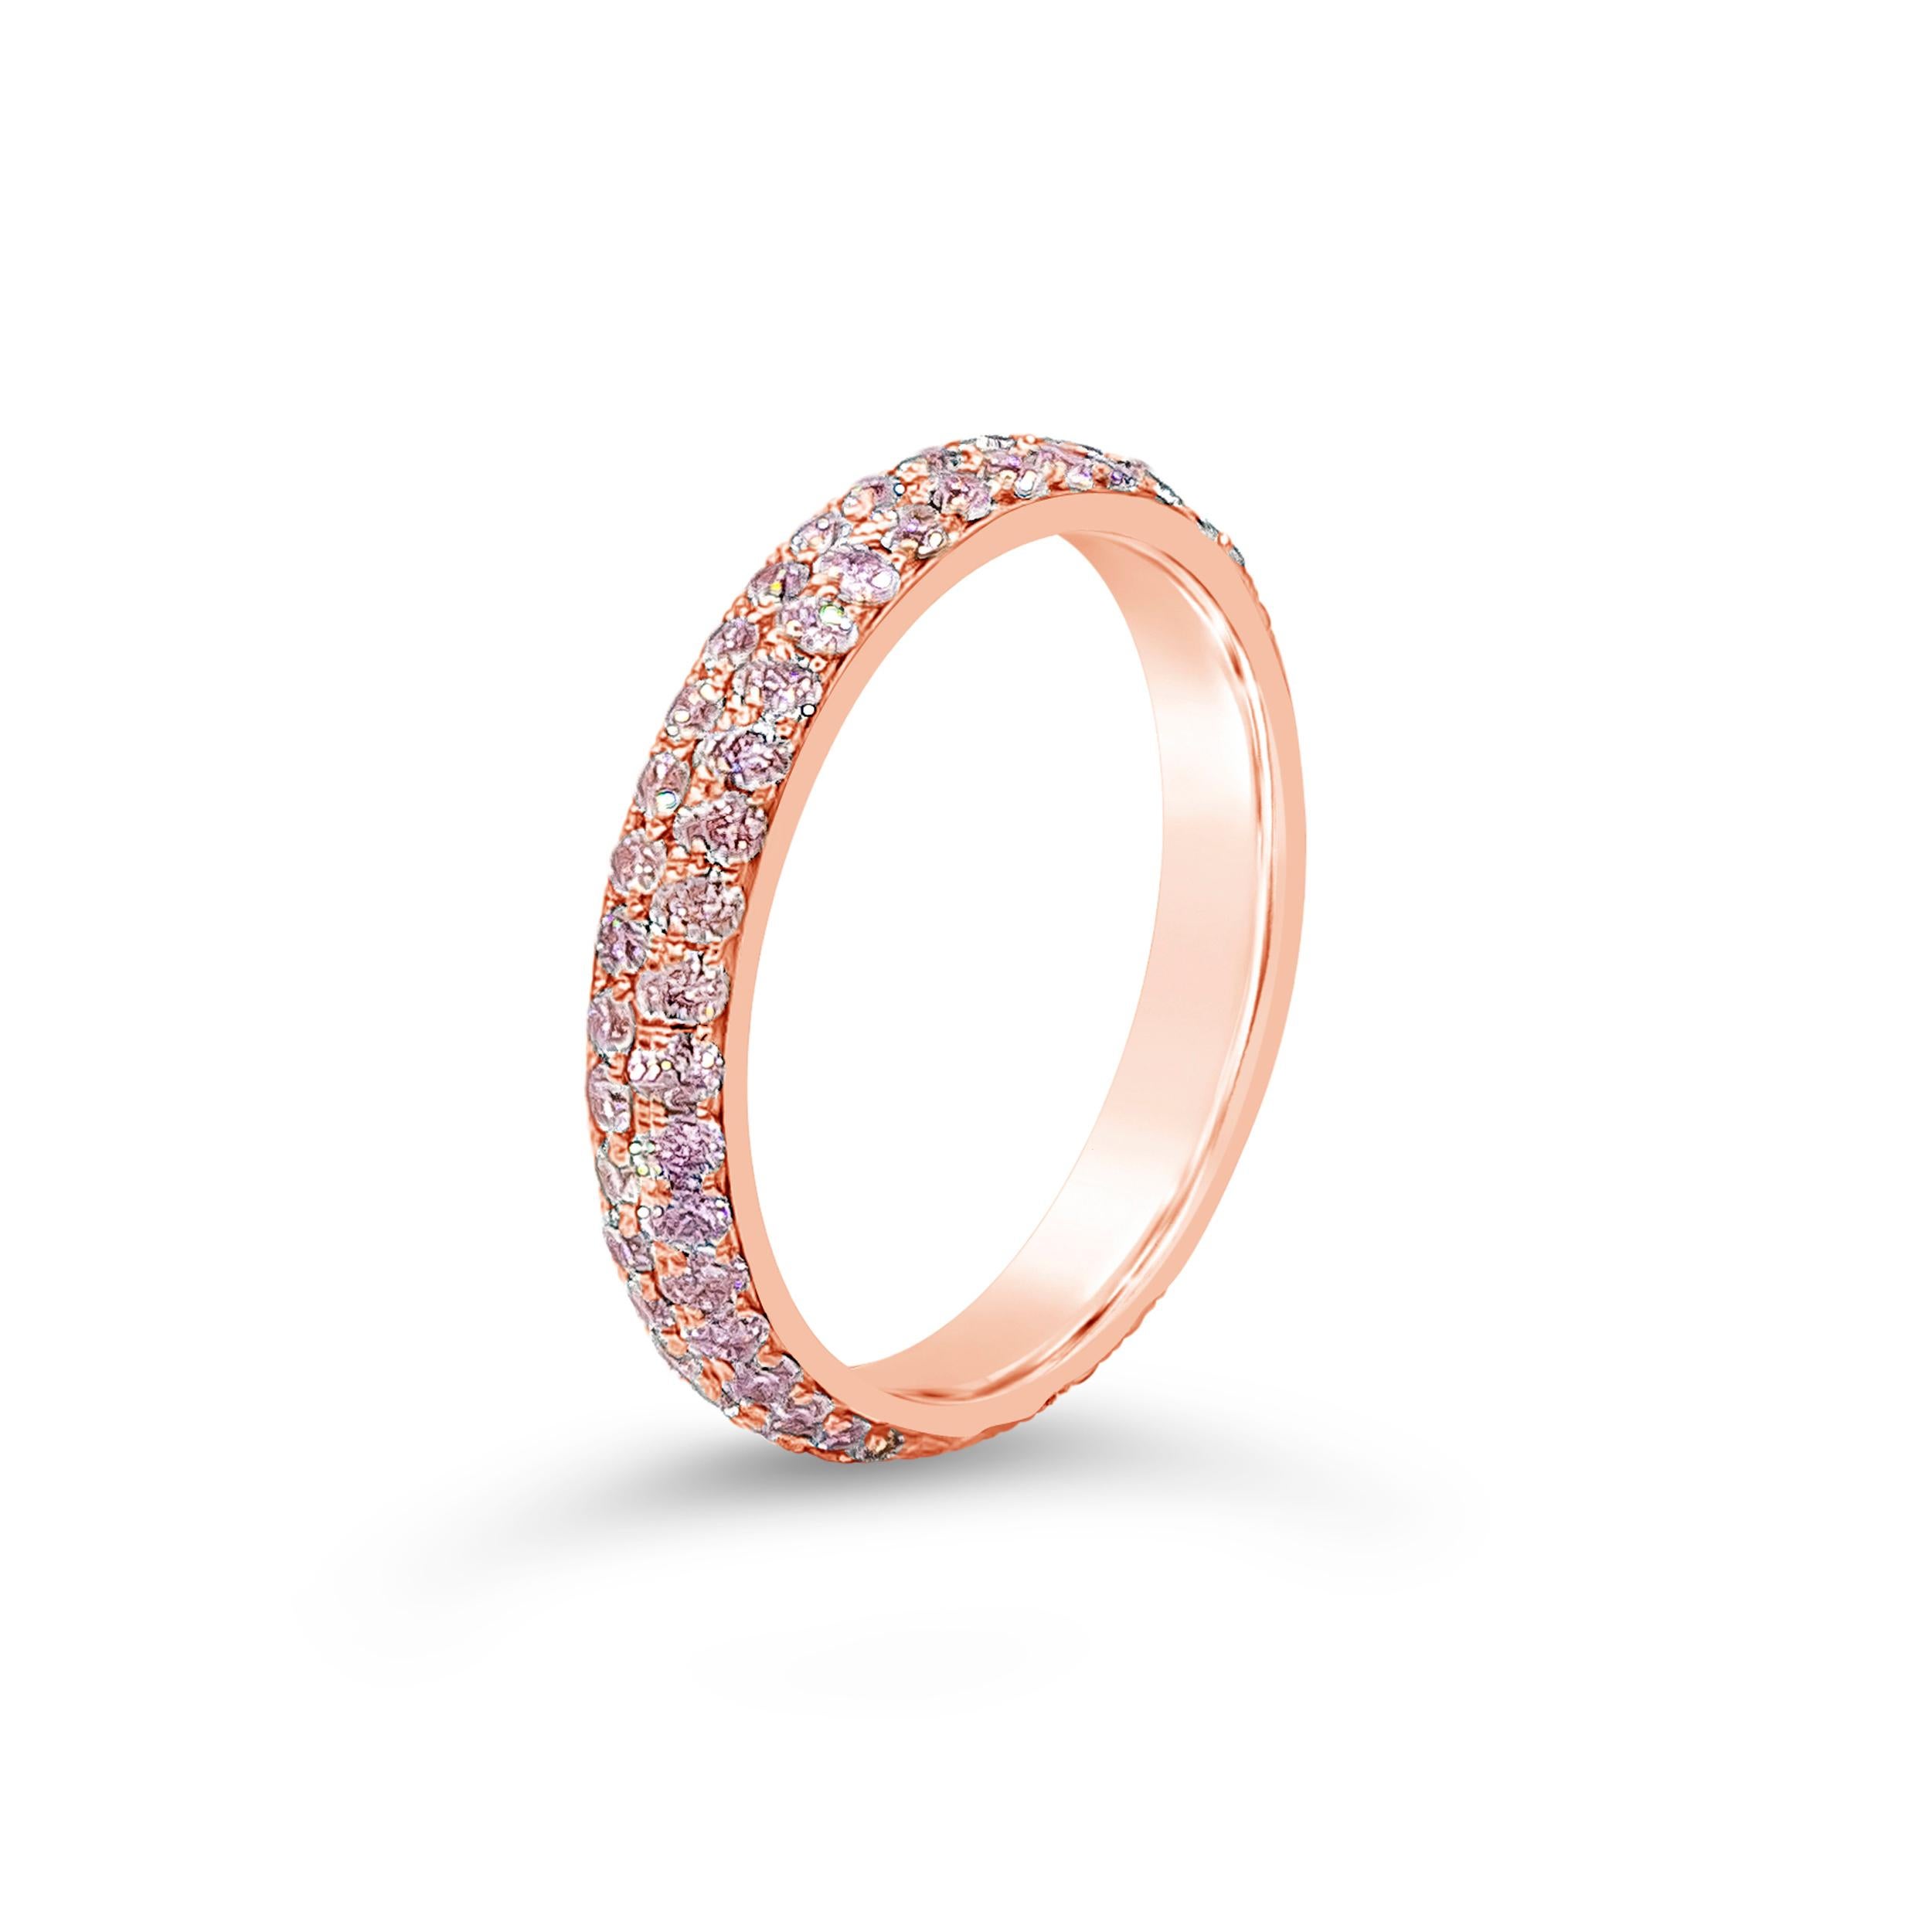 A gorgeous and chic rose gold wedding band showcasing two rows of round pink diamonds, micro-pave set in a rounded 18 karat rose gold mounting. Pink diamonds weigh 1.11 carats total. A versatile piece that can be used as a fashion ring. Size 6.5